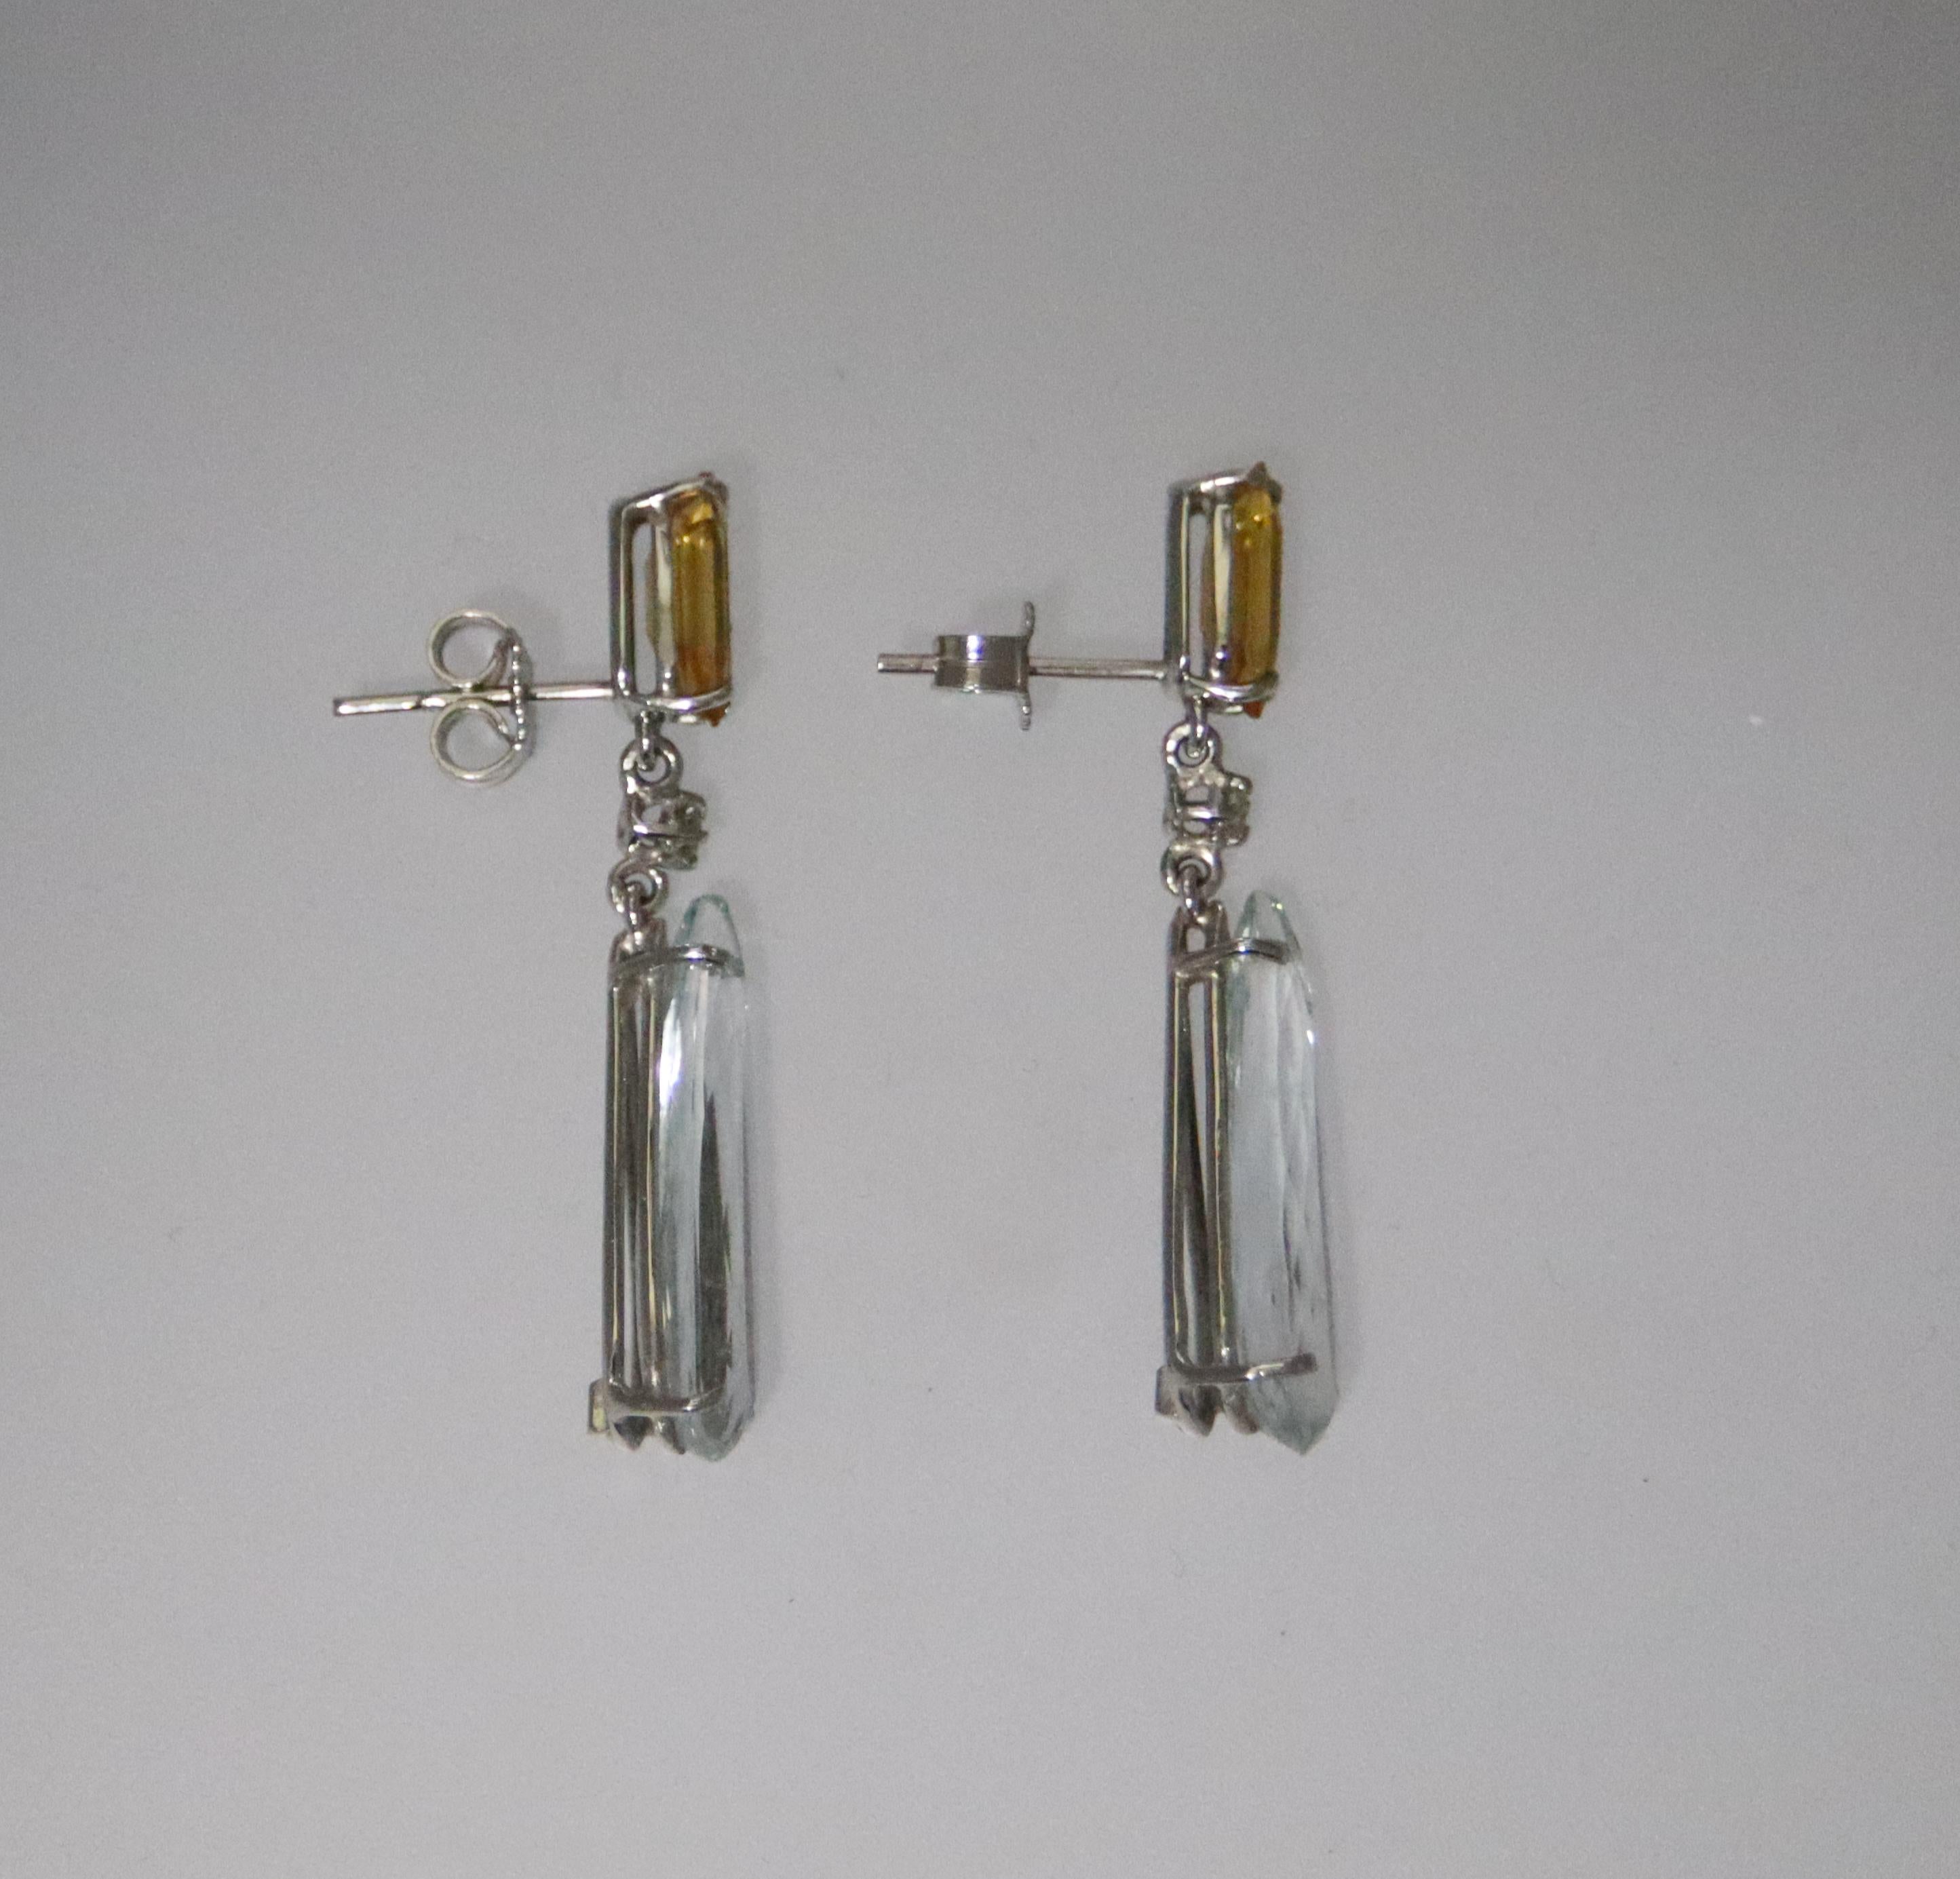 For any problems related to some materials contained in the items that do not allow shipping and require specific documents that require a particular period, please contact the seller with a private message to solve the problem.

Delicious earring